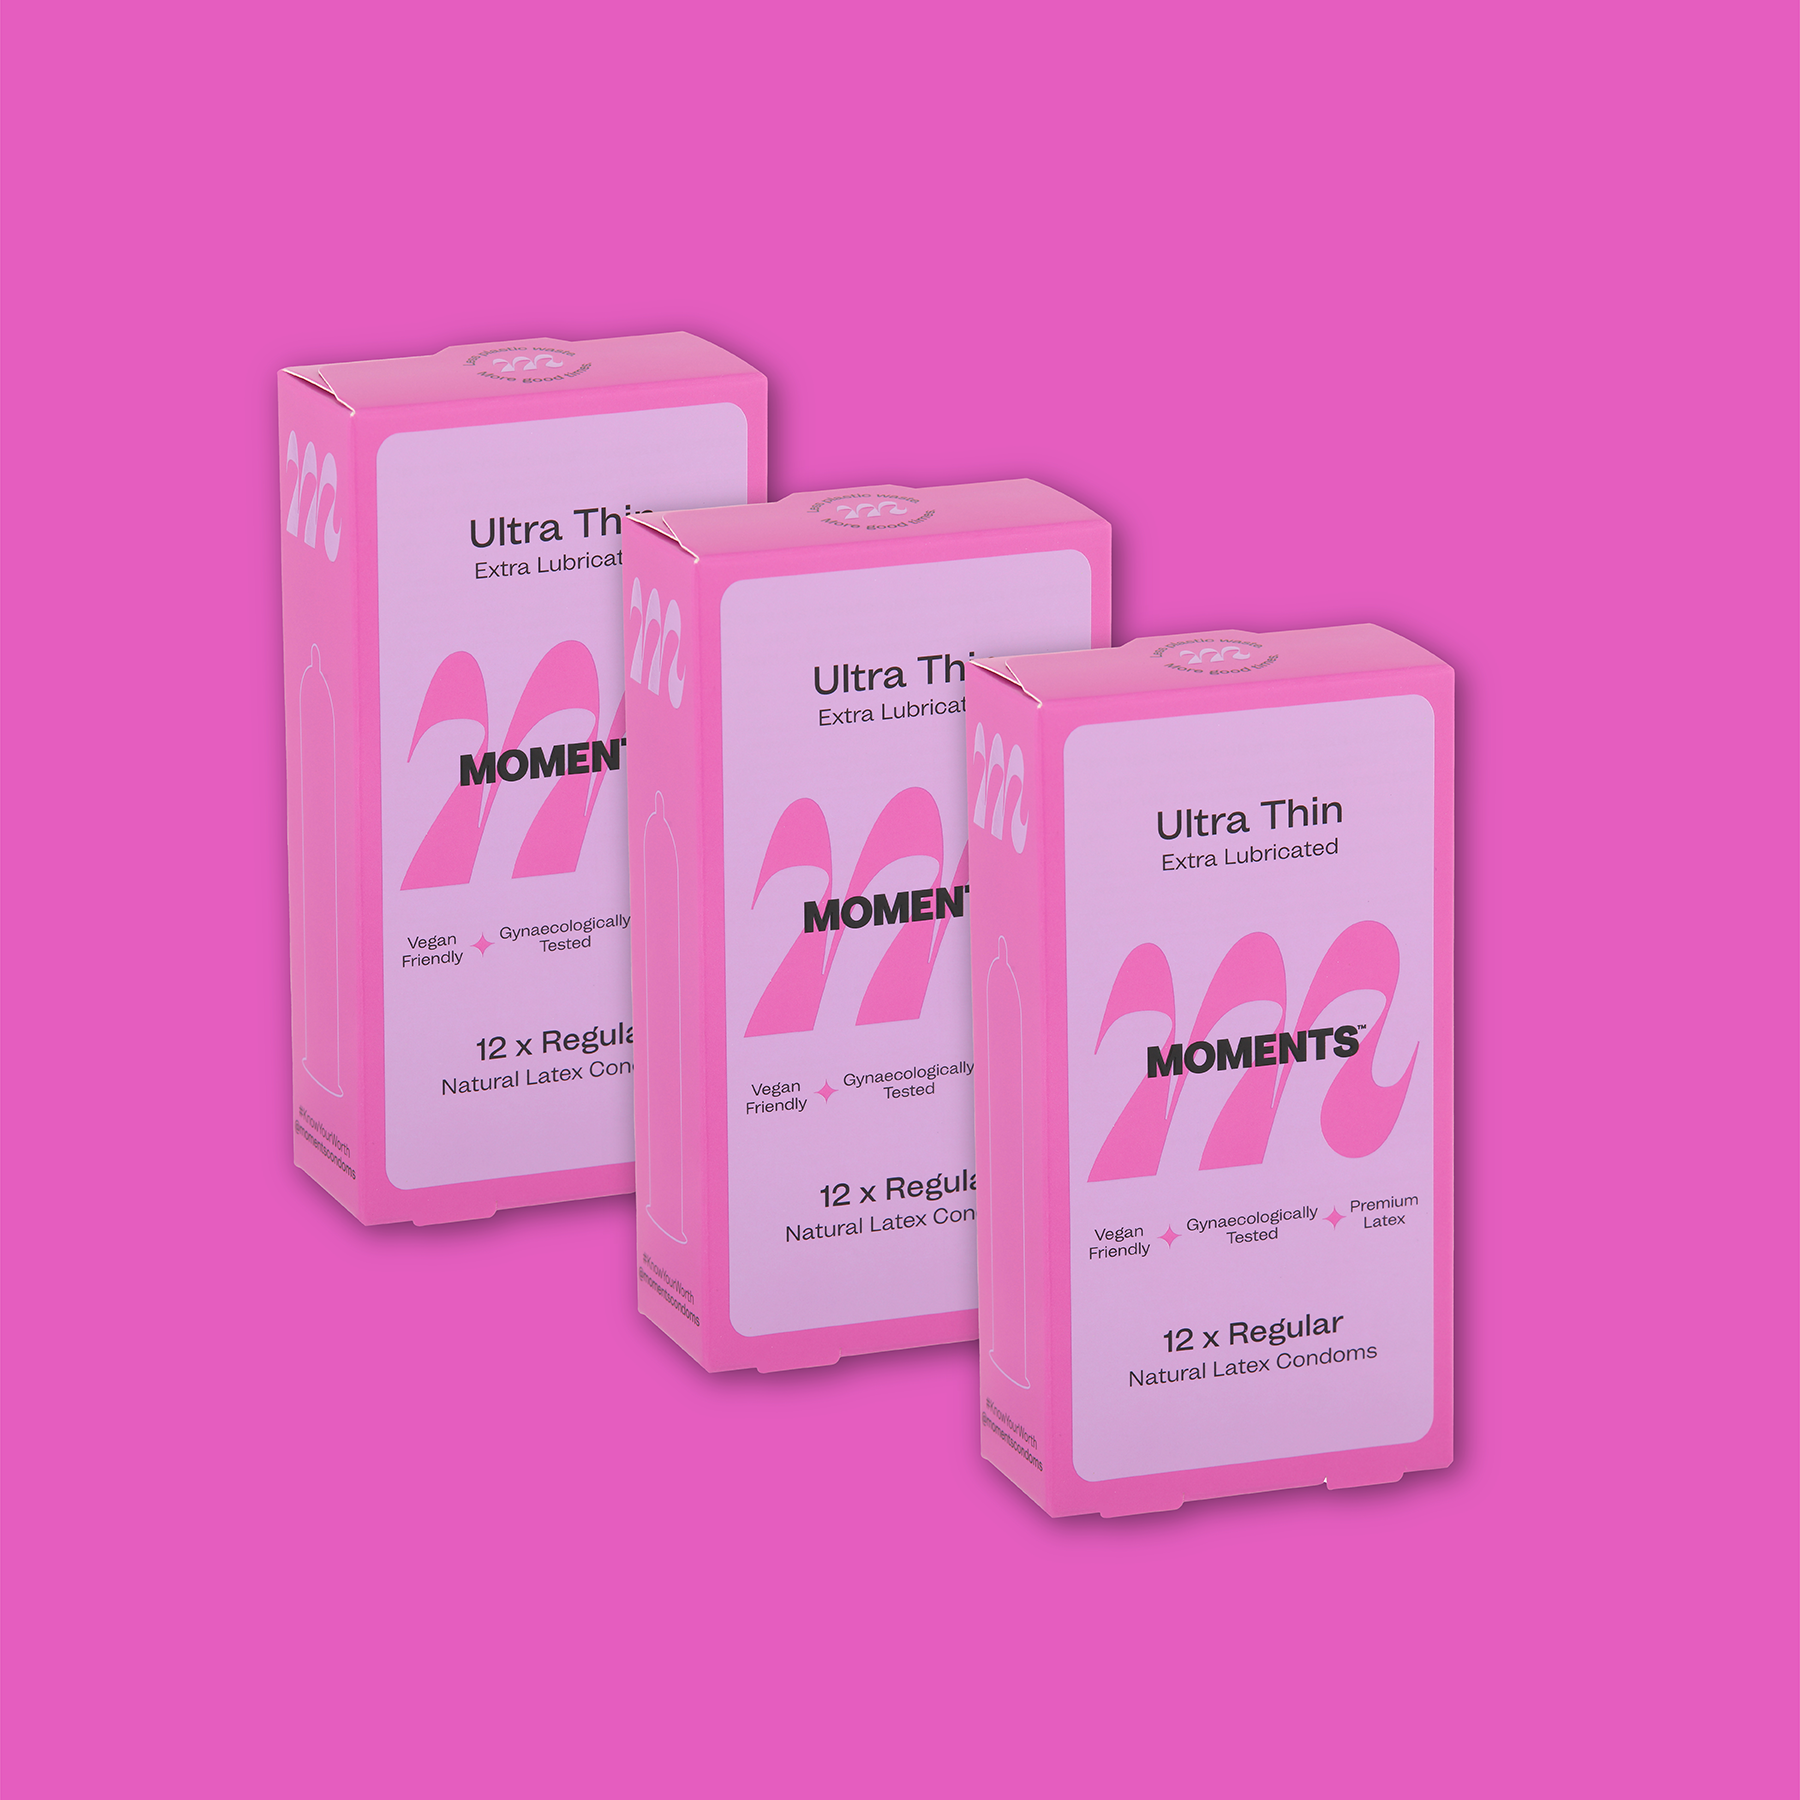 Moments Ultra Thin Regular condom pack displayed against a pink backdrop